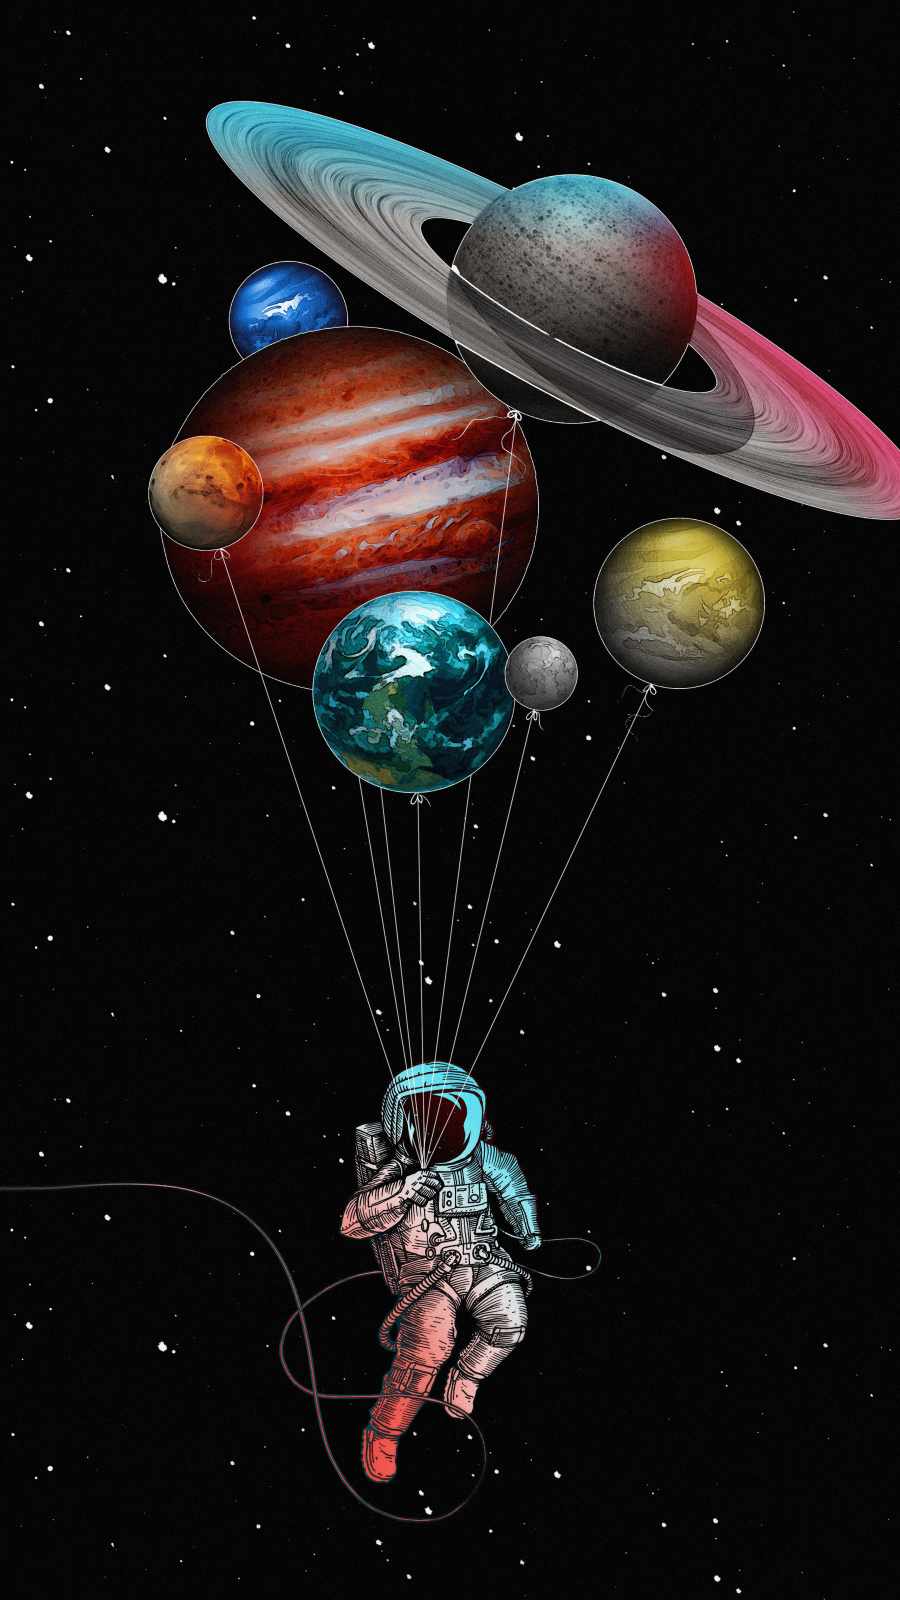 Astronaut with Planet Balloons